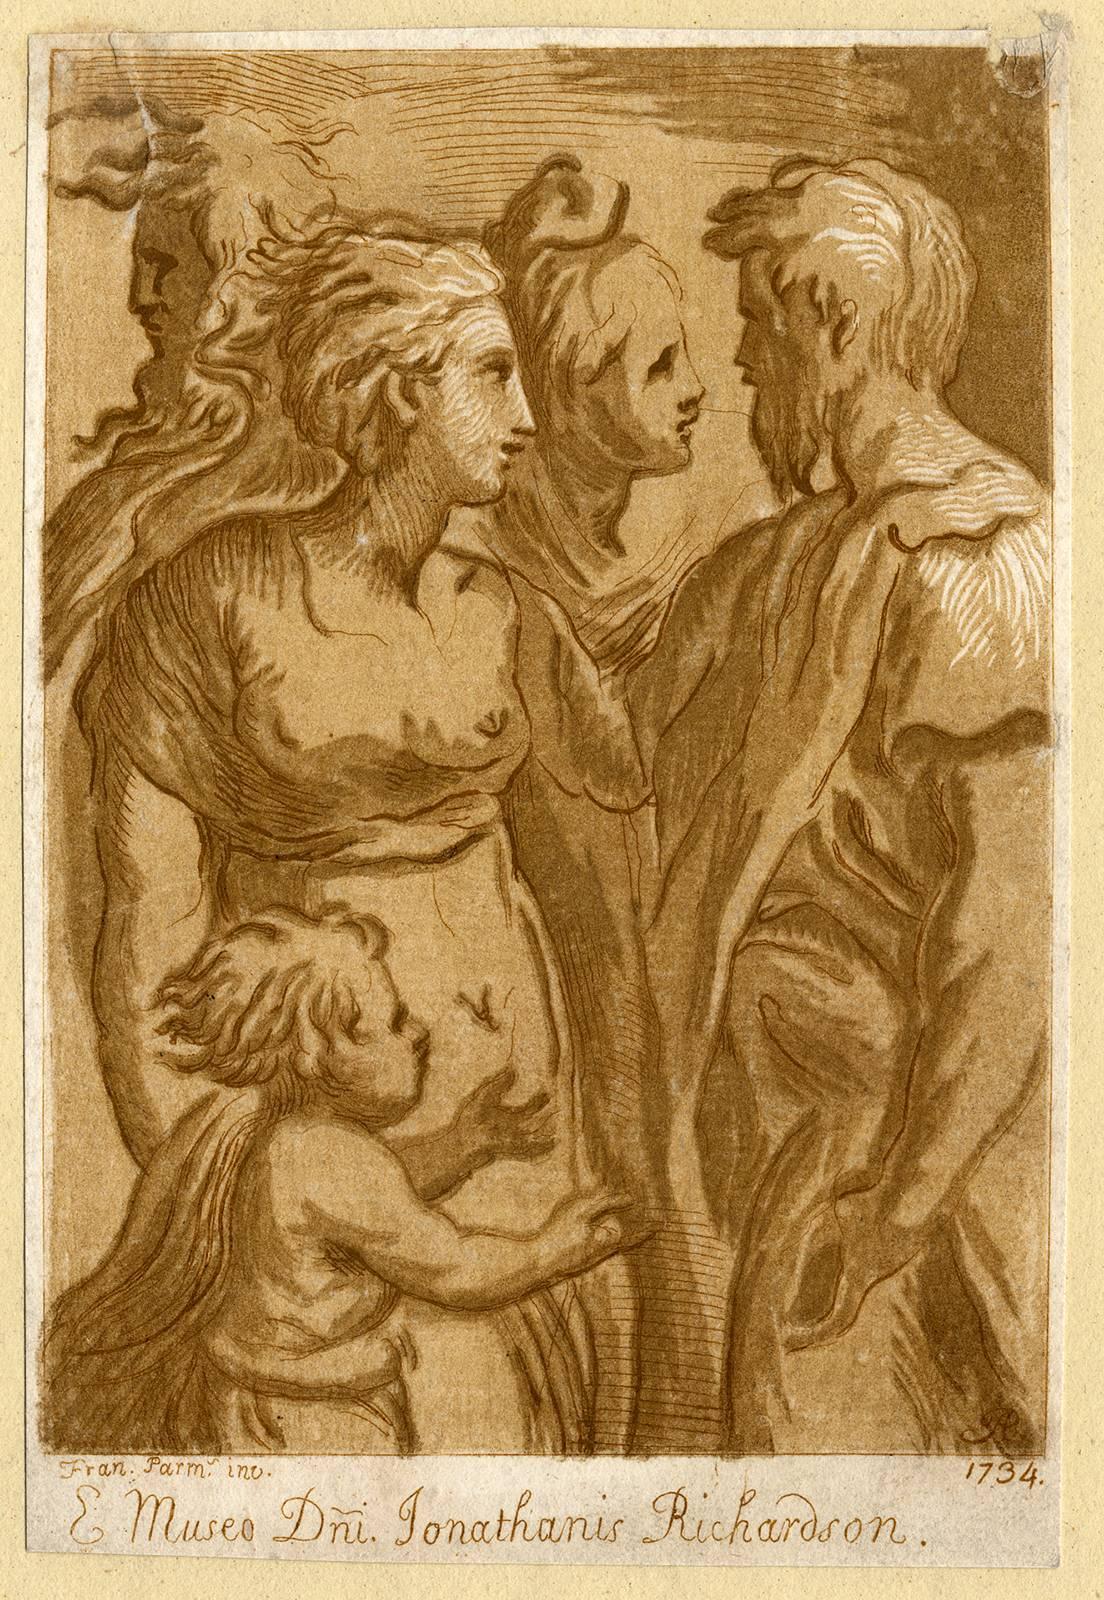 Arthur Pond Portrait Print - Untitled - Portrait of two men and two women and a small child.